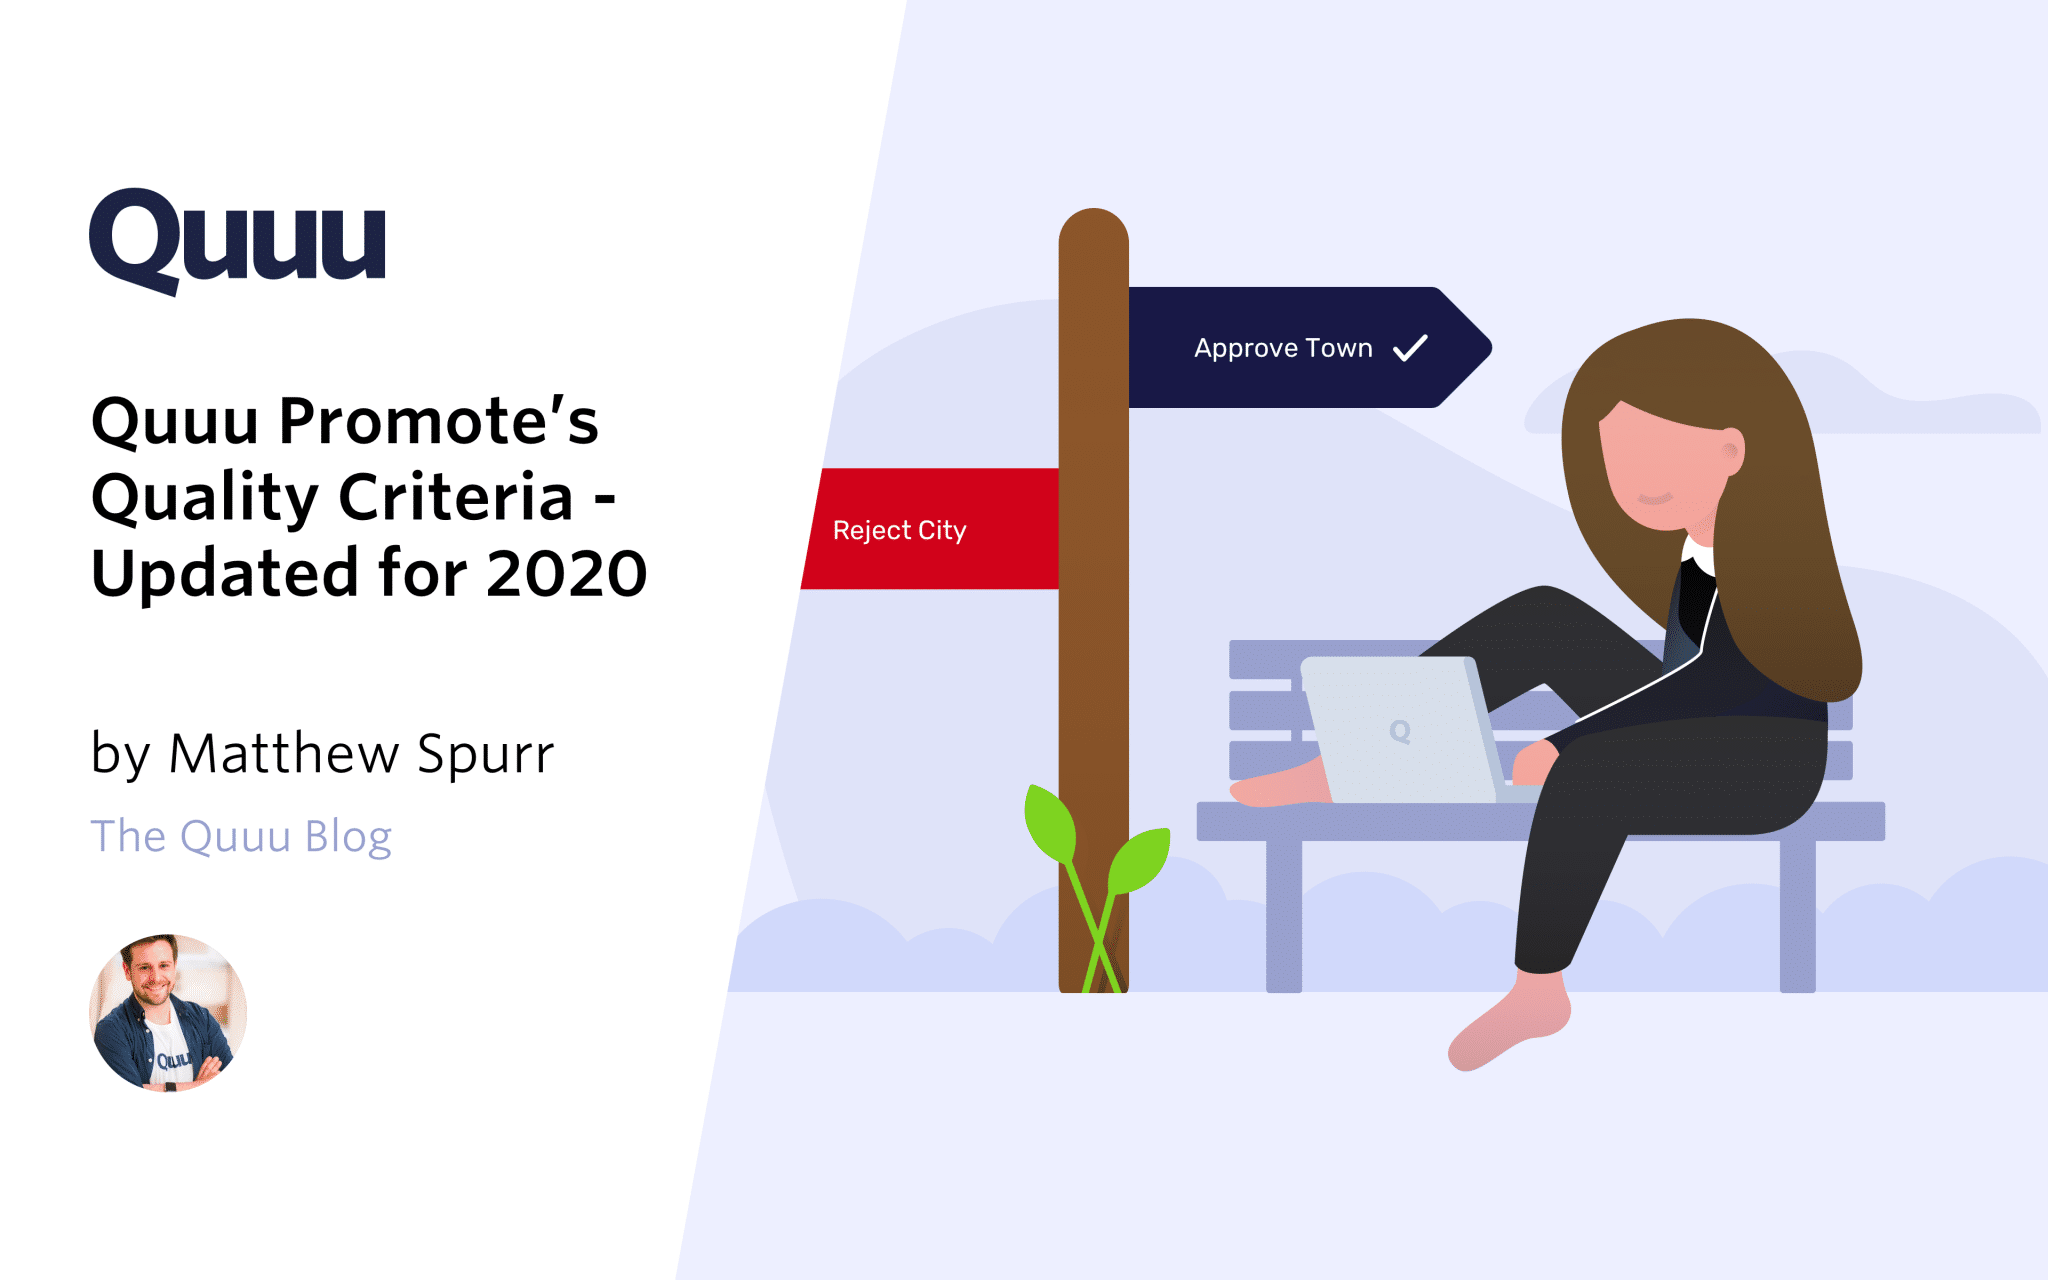 Quuu Promote's Quality Criteria - Updated for 2020